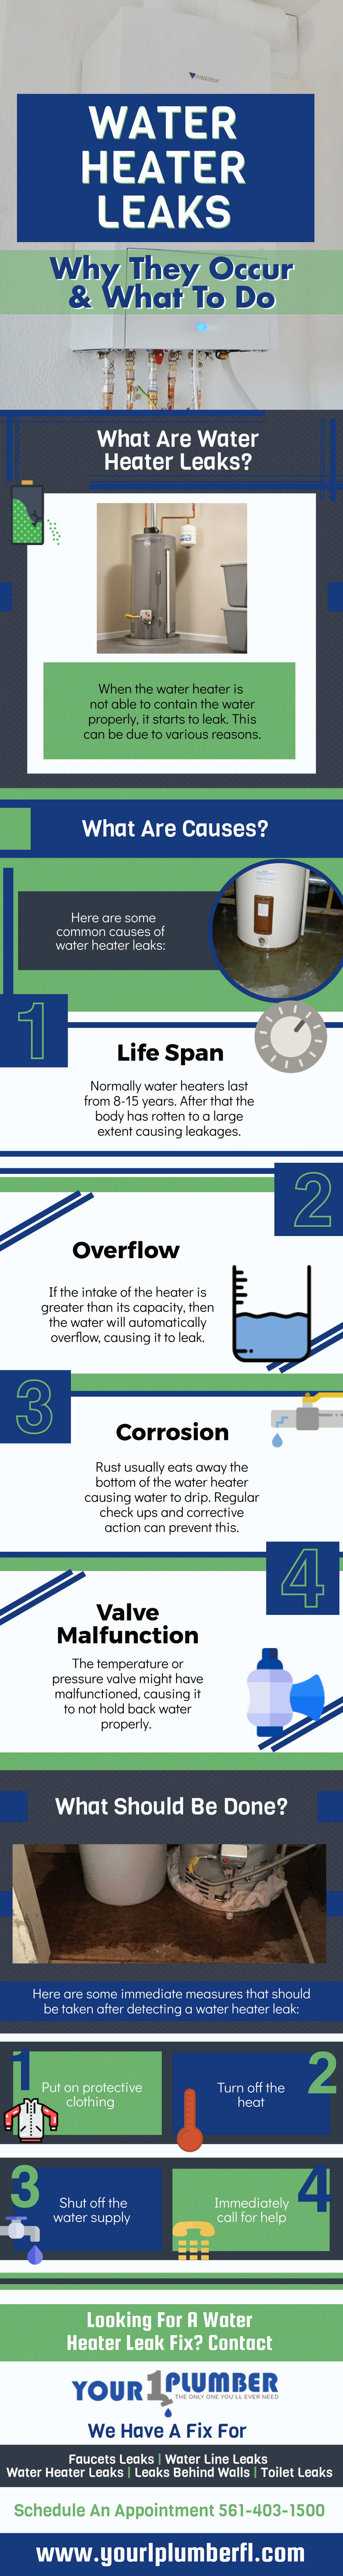 water-heater-leaks-why-they-occur-and-what-to-do